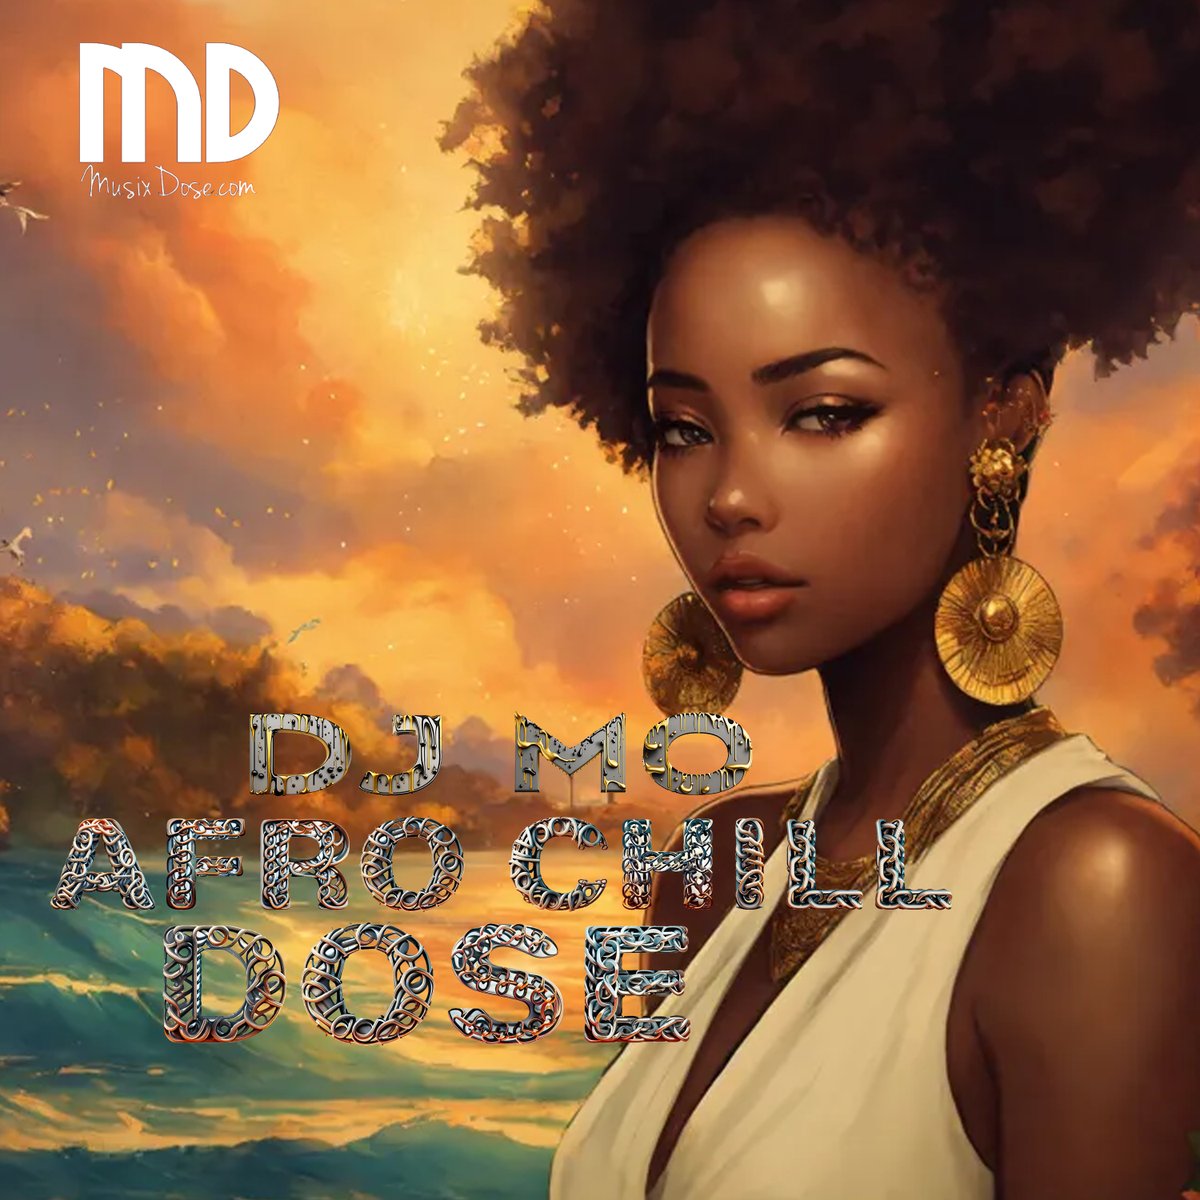 Check out the Afro Chill Dose Hour with DJ MO #musixdose #afrobeats #RandB #Hiphop Sun 1130 pm pst & Sat 1:00 am Pst